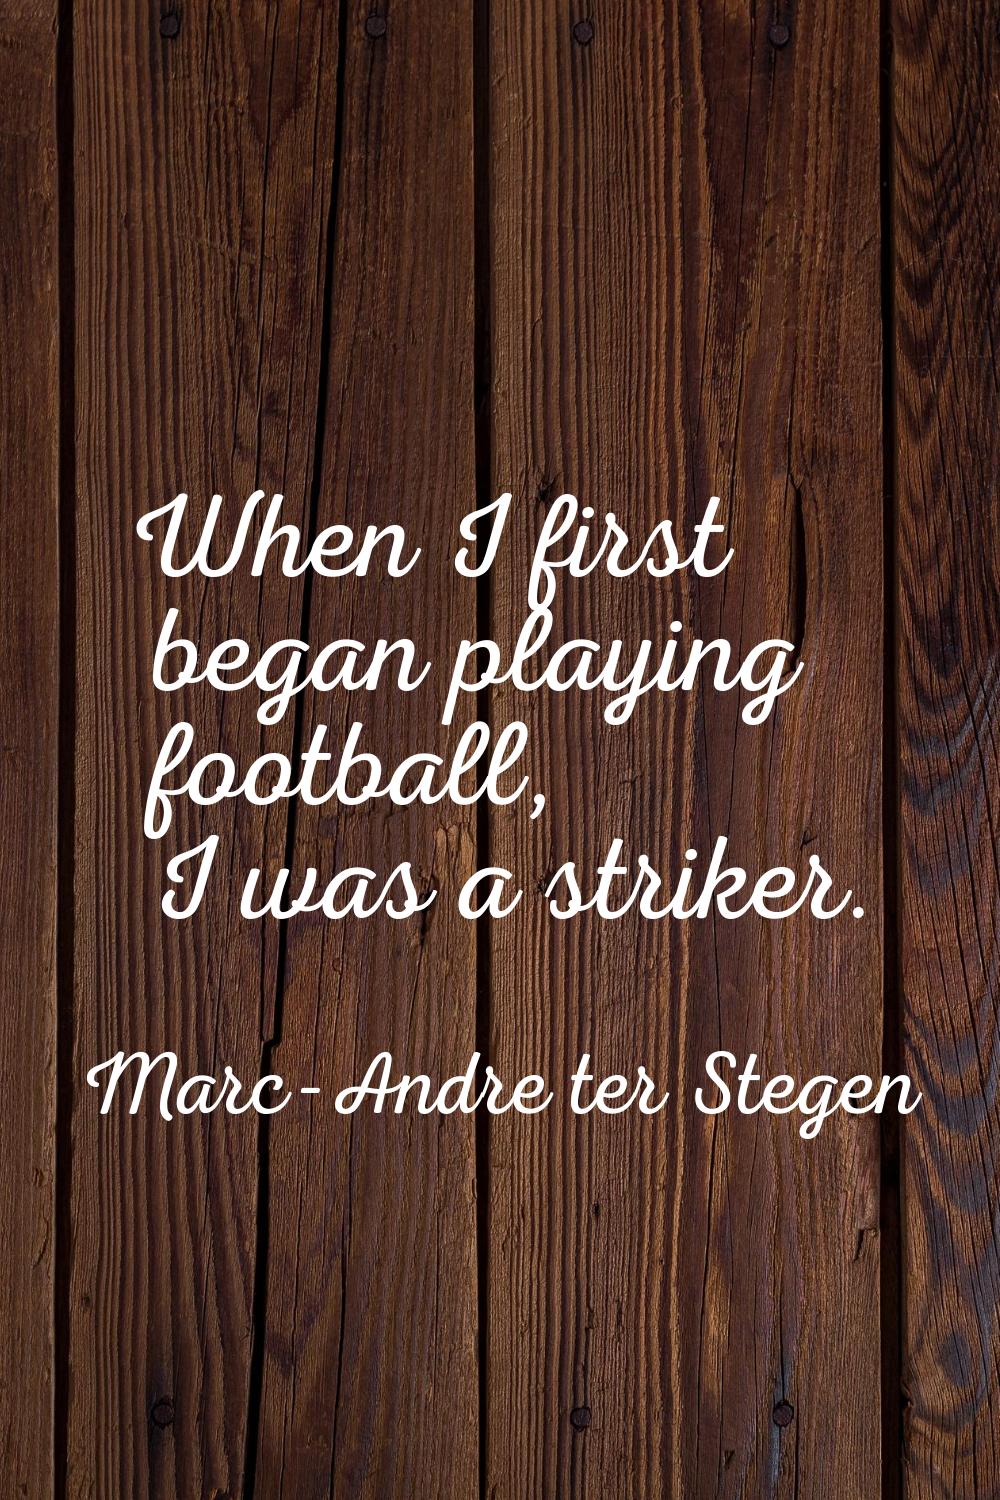 When I first began playing football, I was a striker.